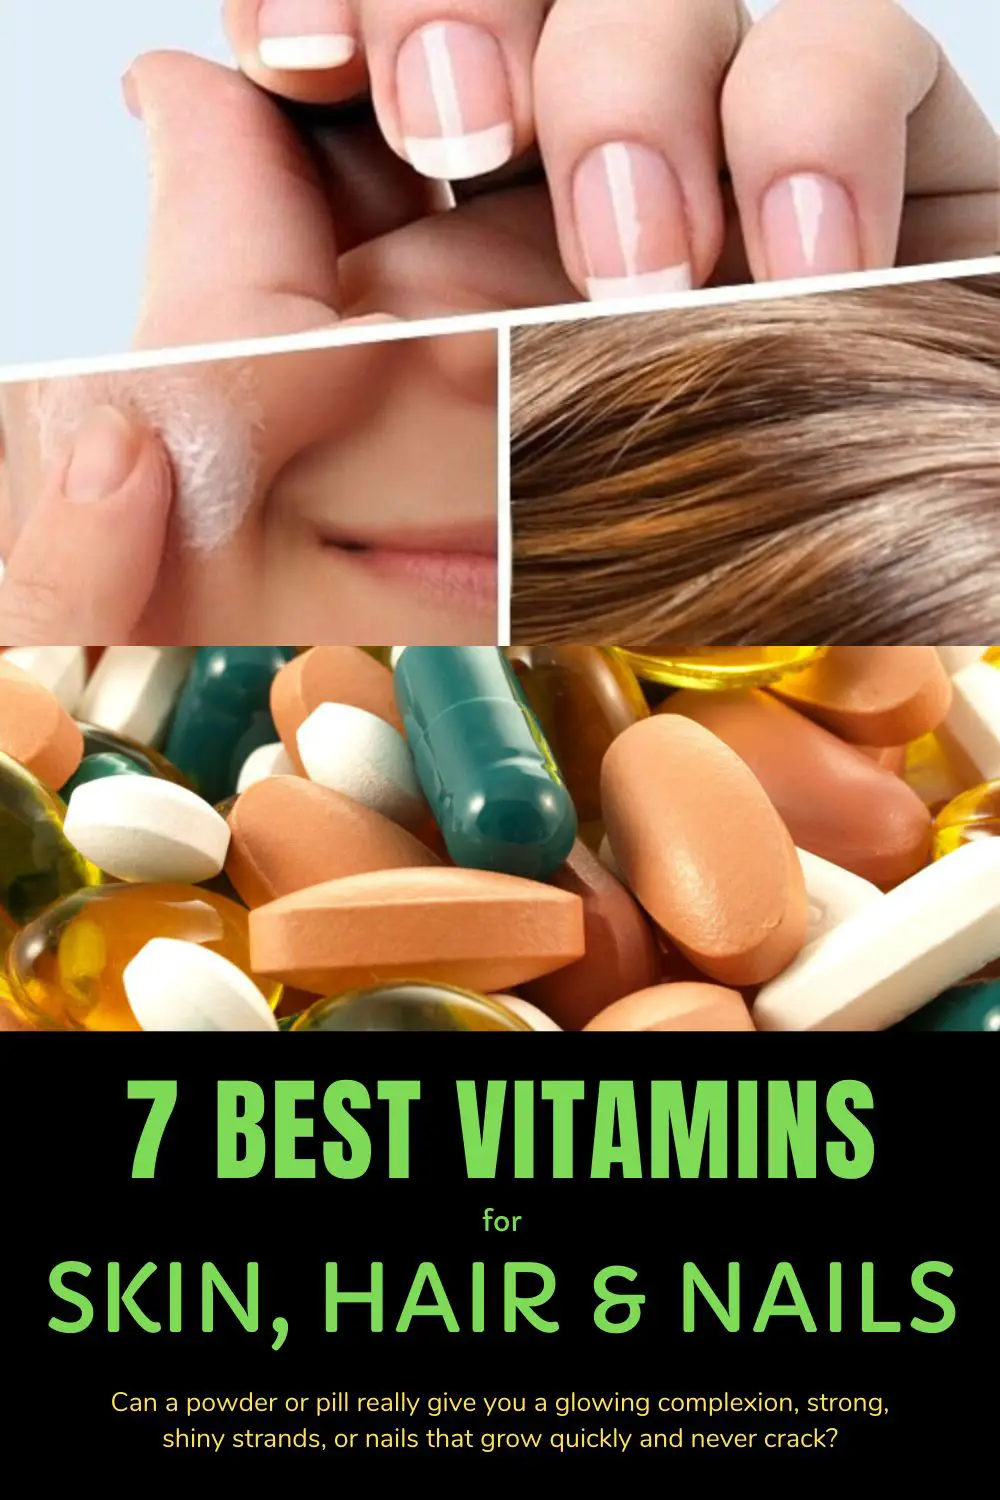 7 Best Vitamins for Hair, Skin and Nails